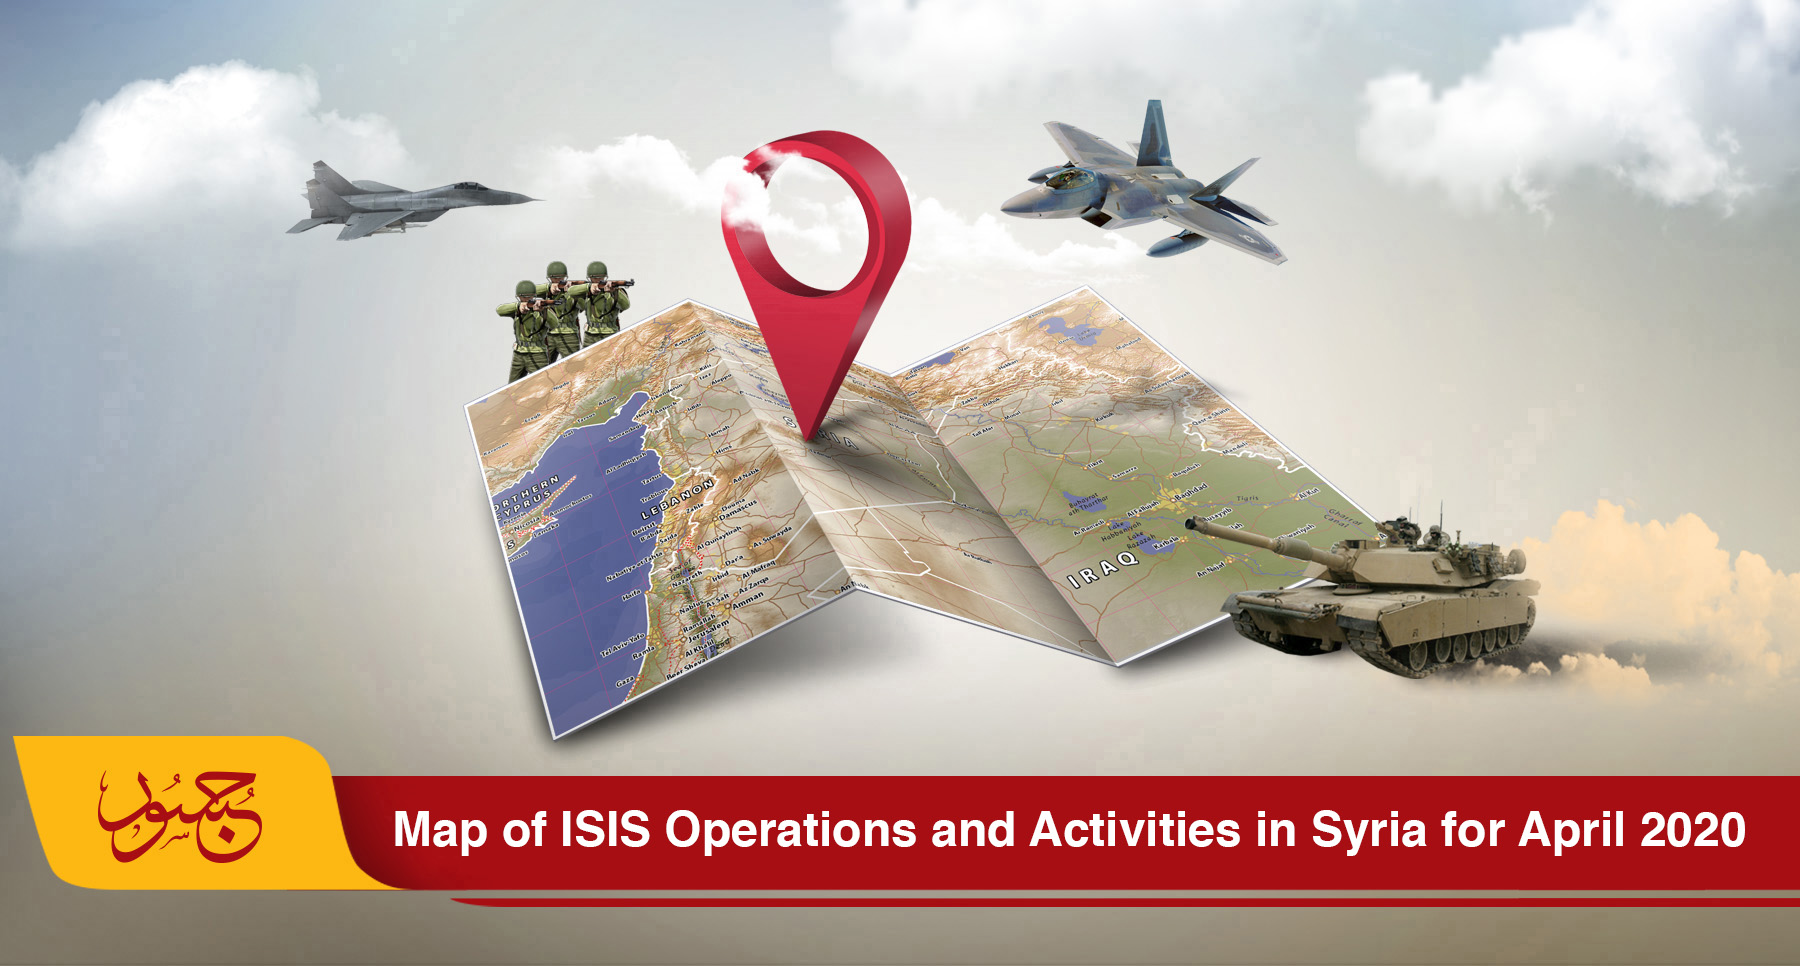 The Map of ISIS Operations and Activities in Syria during April 2020